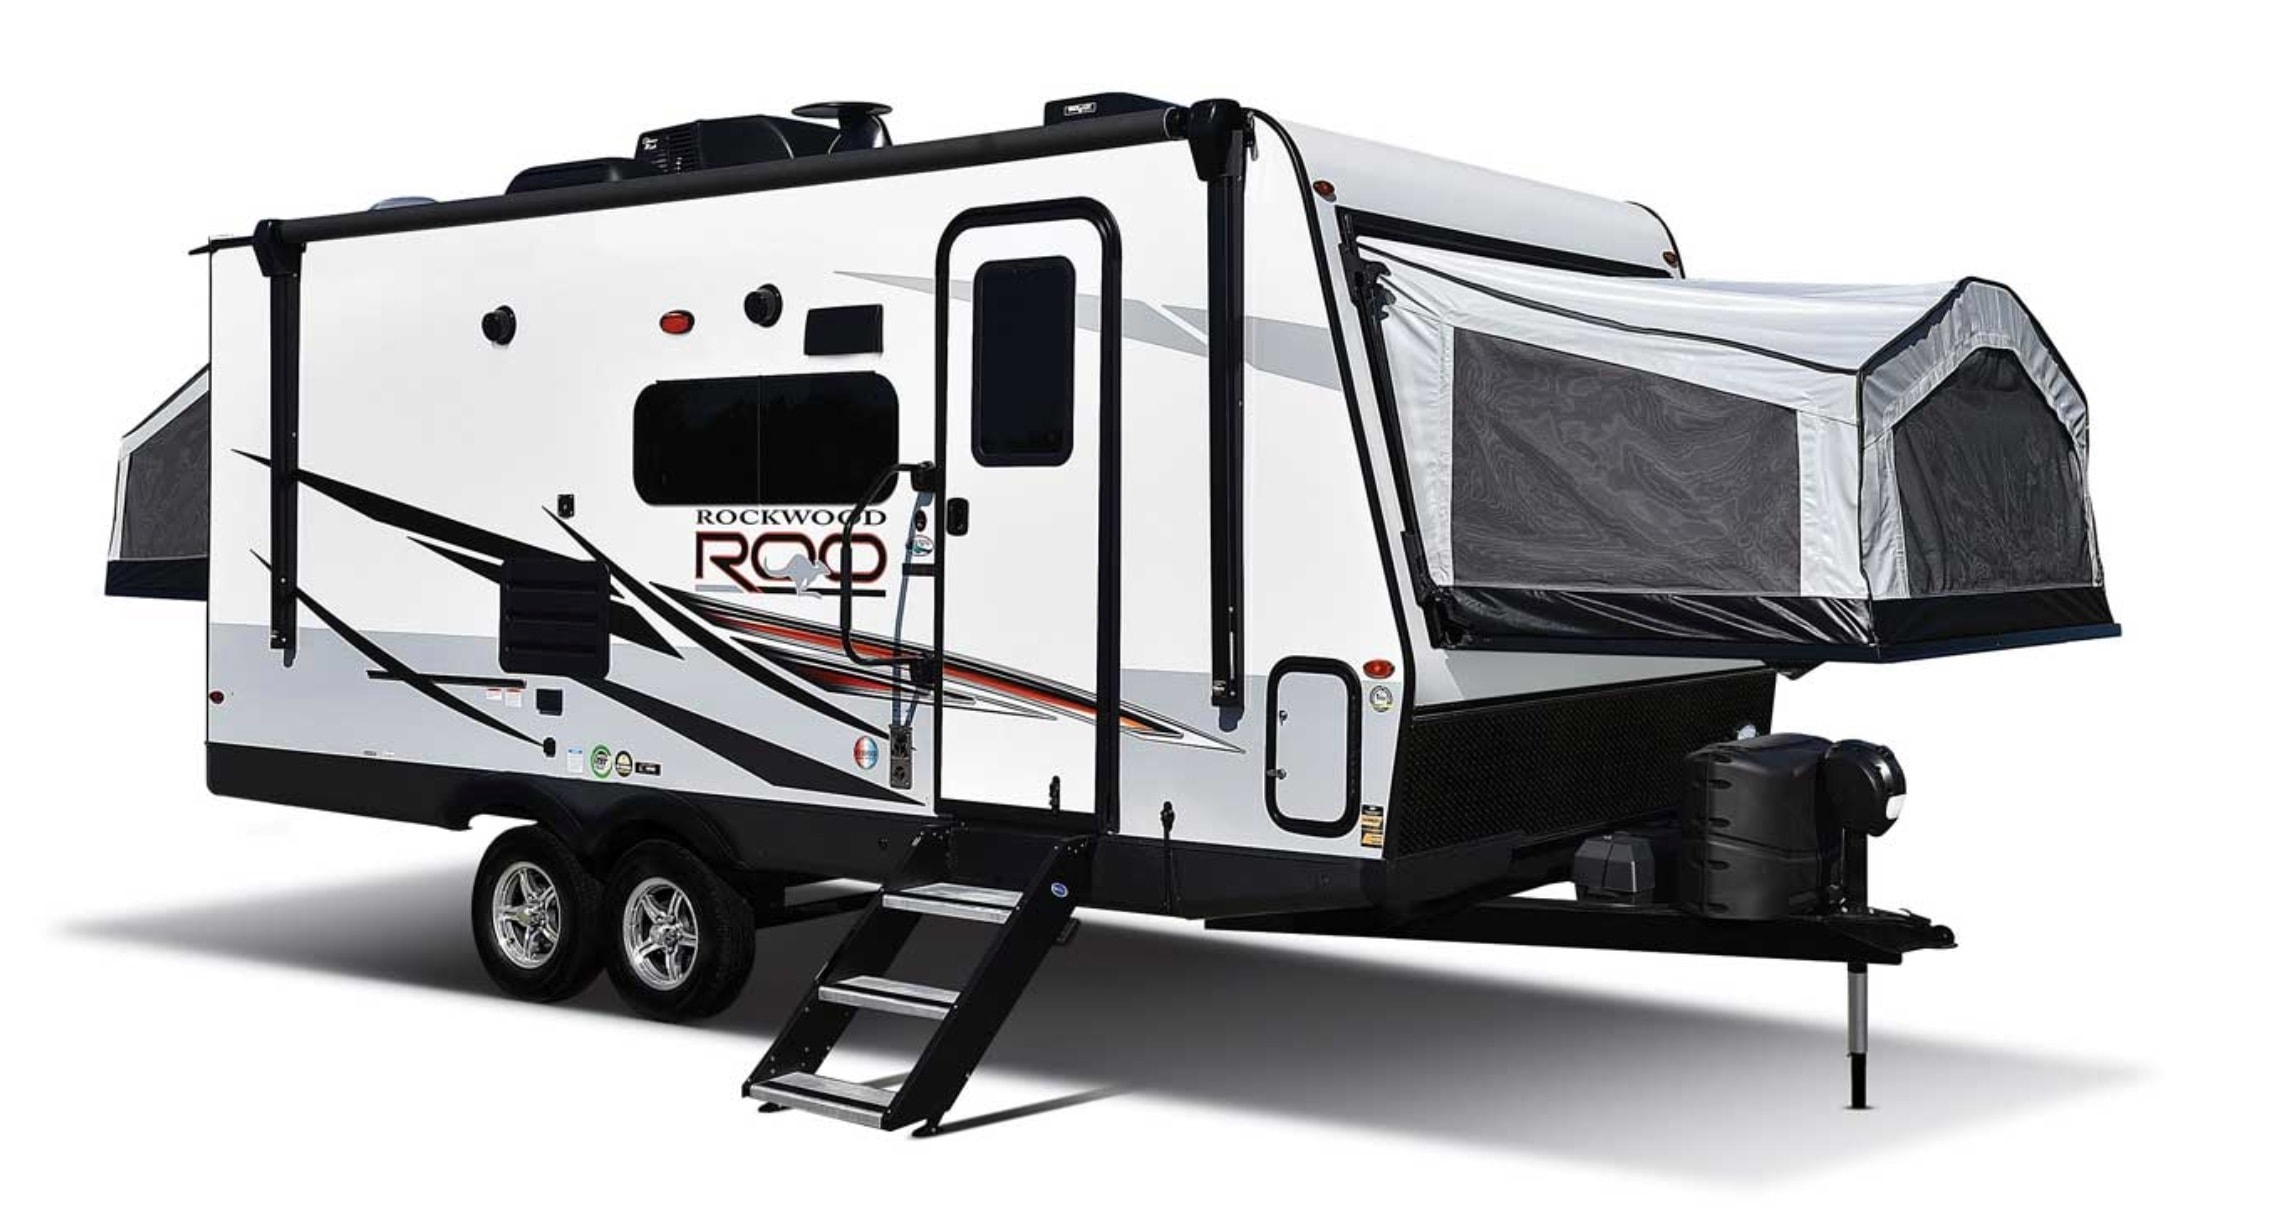 Rockwood Roo Hybrid Campers Demonstrate What It Means To Be Versatile